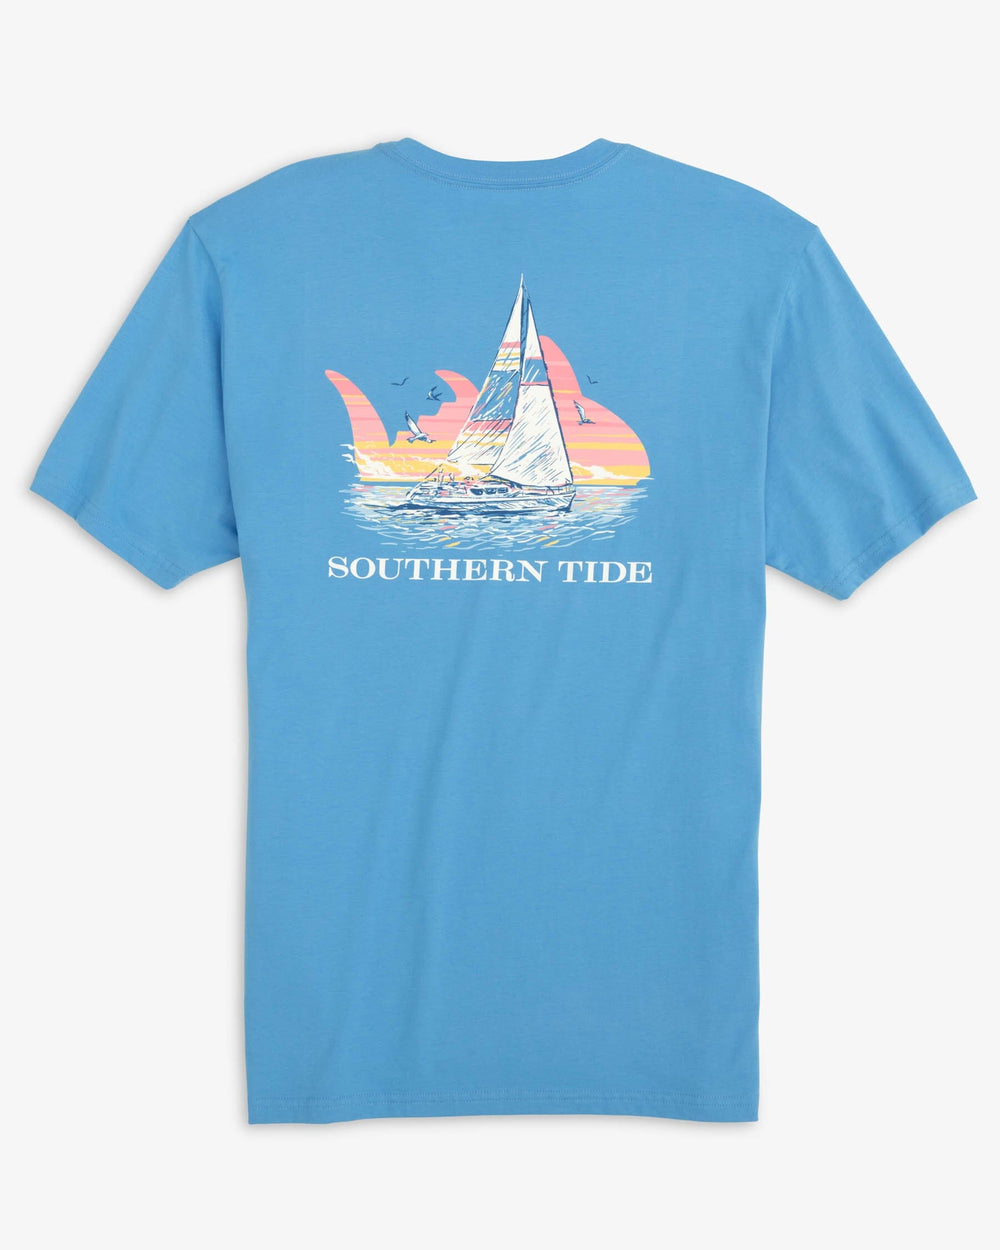 The back view of the Southern Tide Sunset Sailor T-Shirt by Southern Tide - Boat Blue